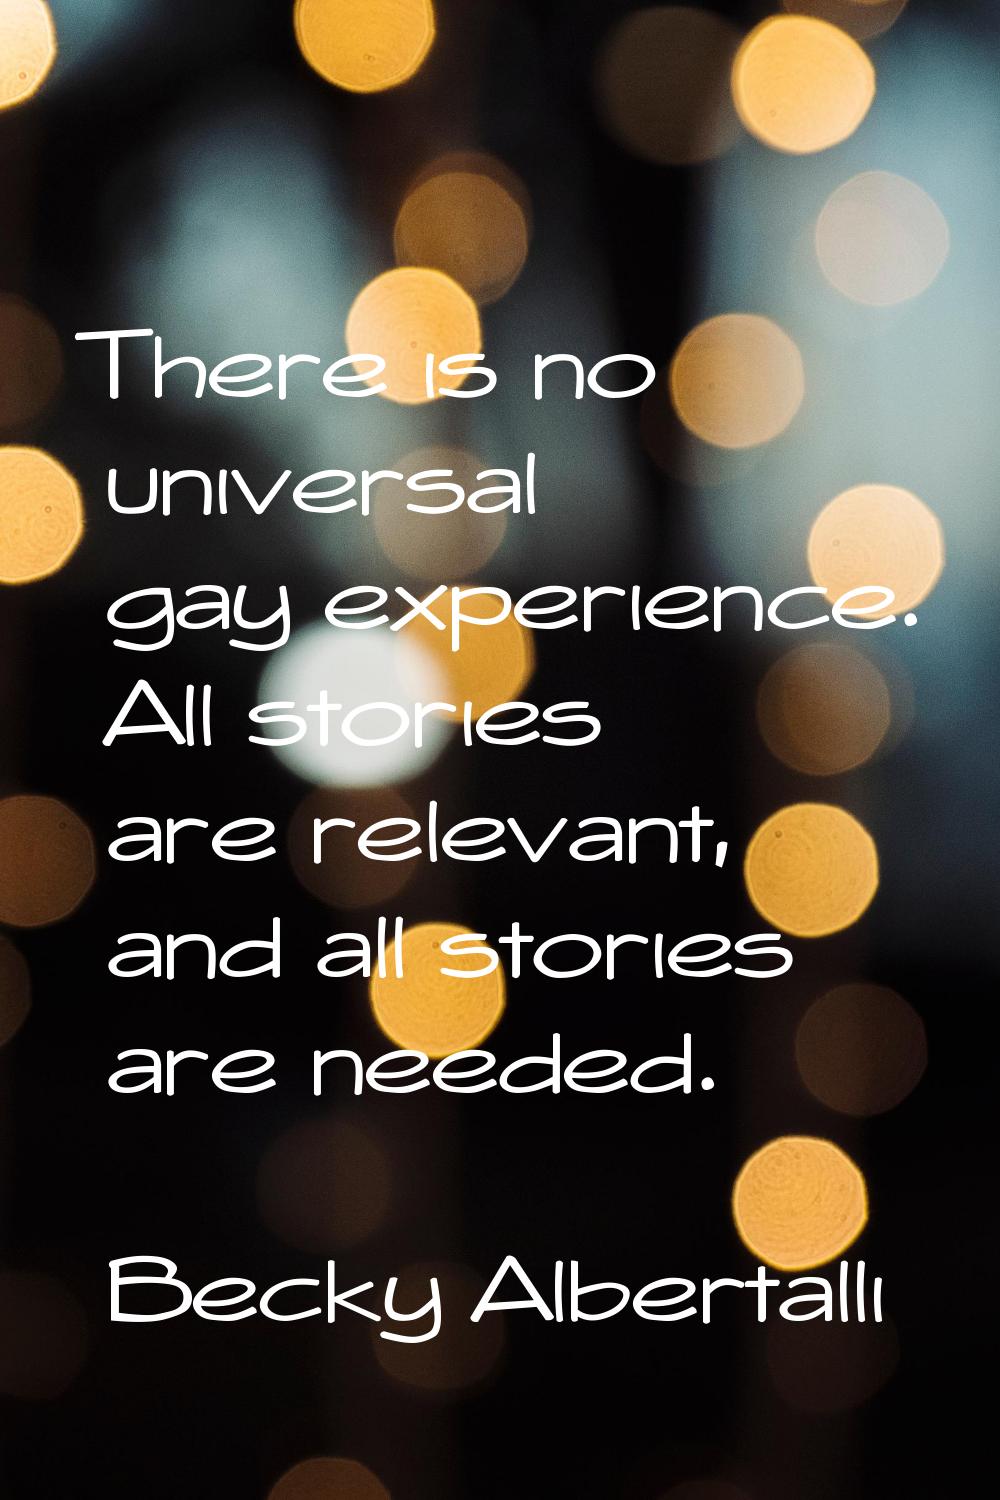 There is no universal gay experience. All stories are relevant, and all stories are needed.